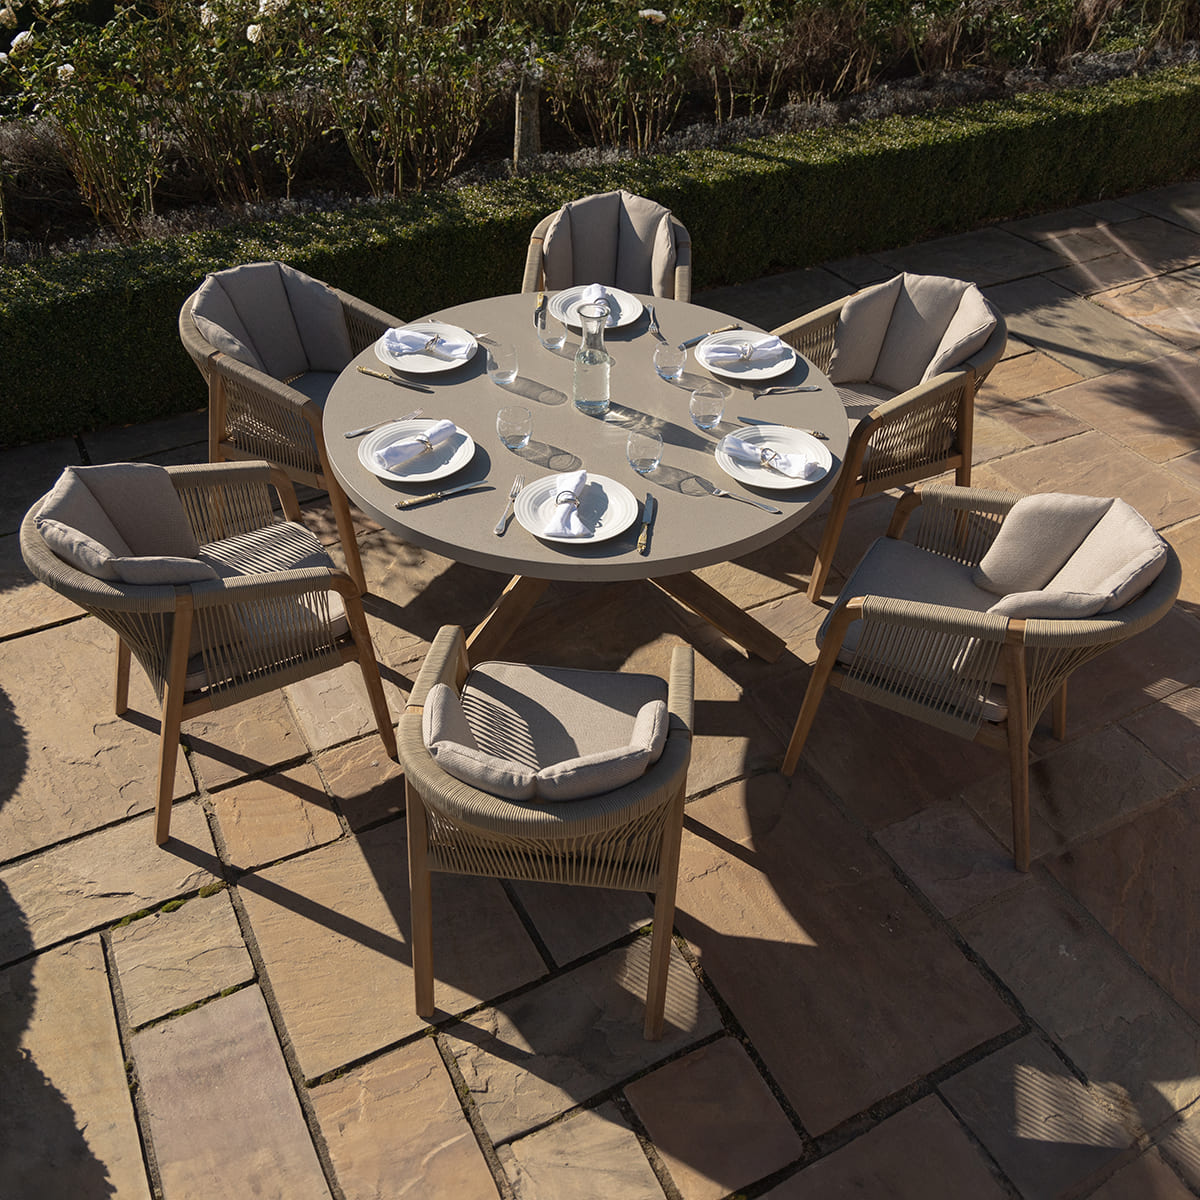 Maze - Martinique Rope Weave 6 Seat Round Dining Set